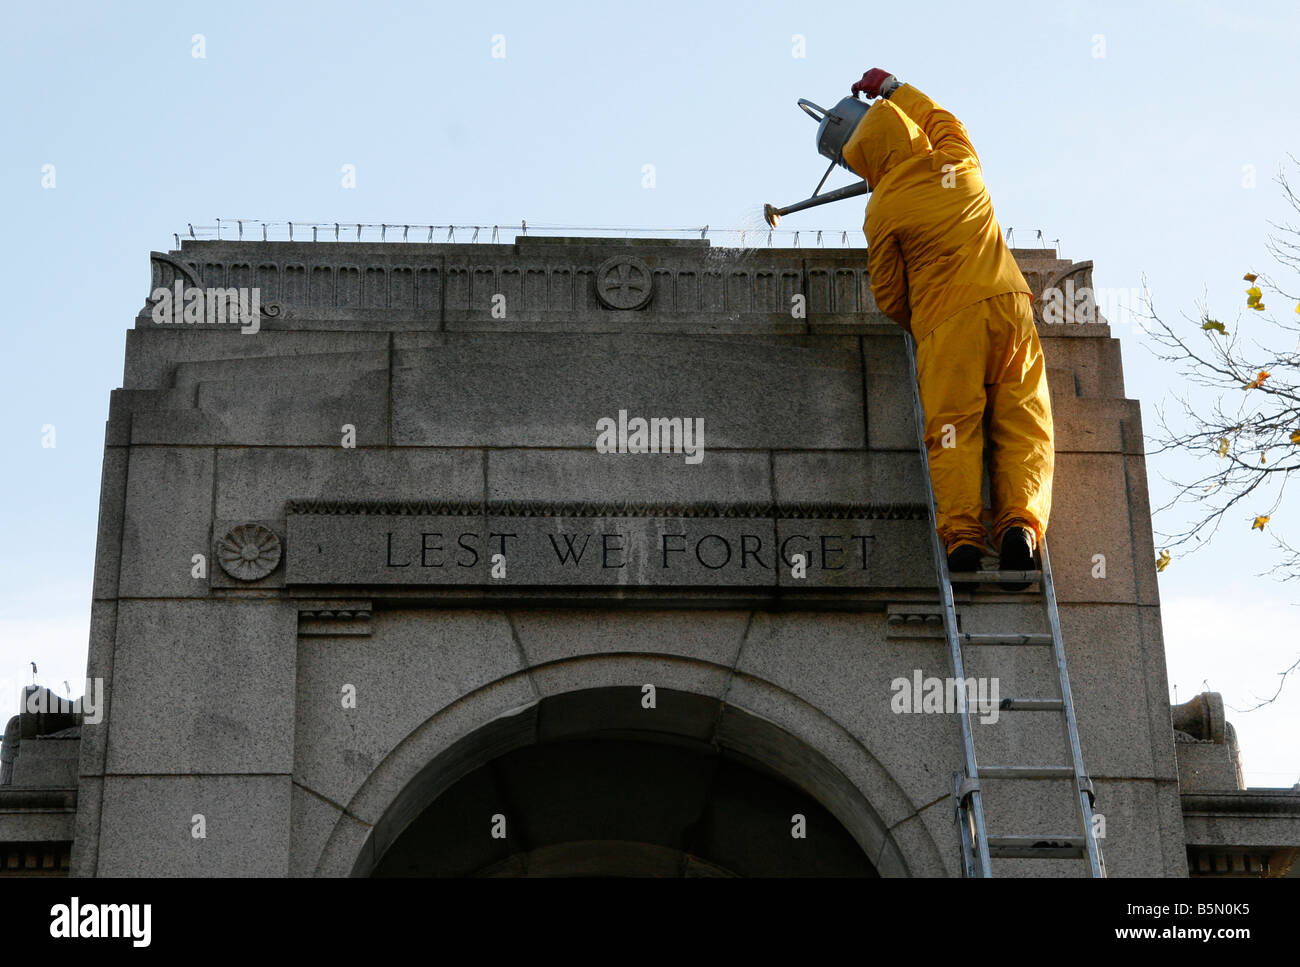 Council Worker Cleaning The Cenotaph in Bolton Lancashire UK Stock Photo